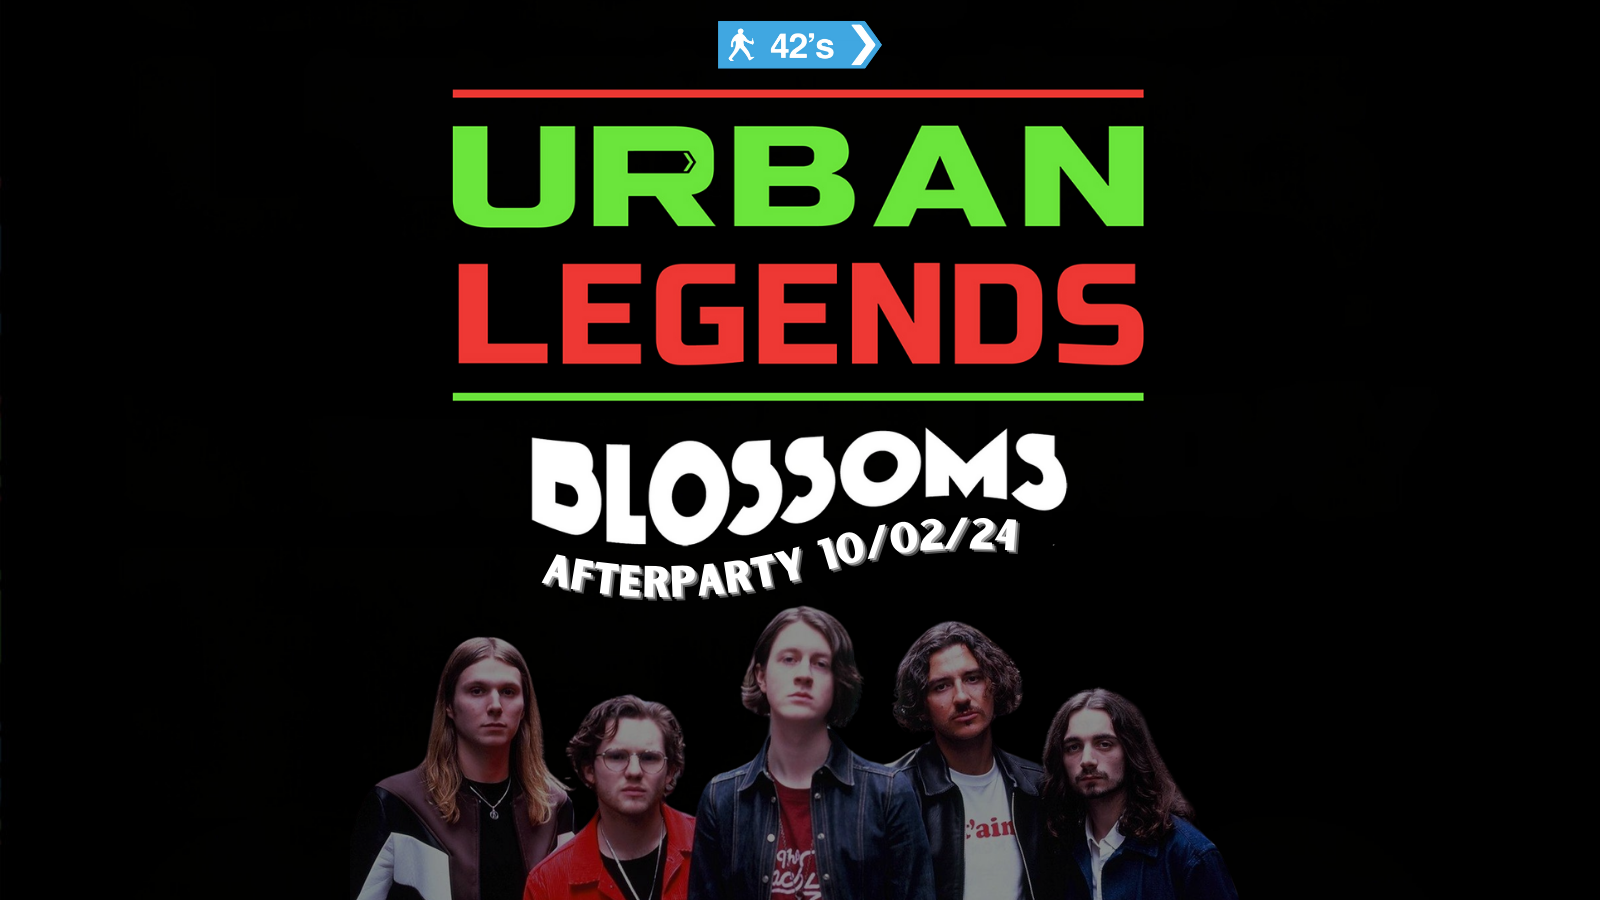 Urban Legends – Blossoms Afterparty